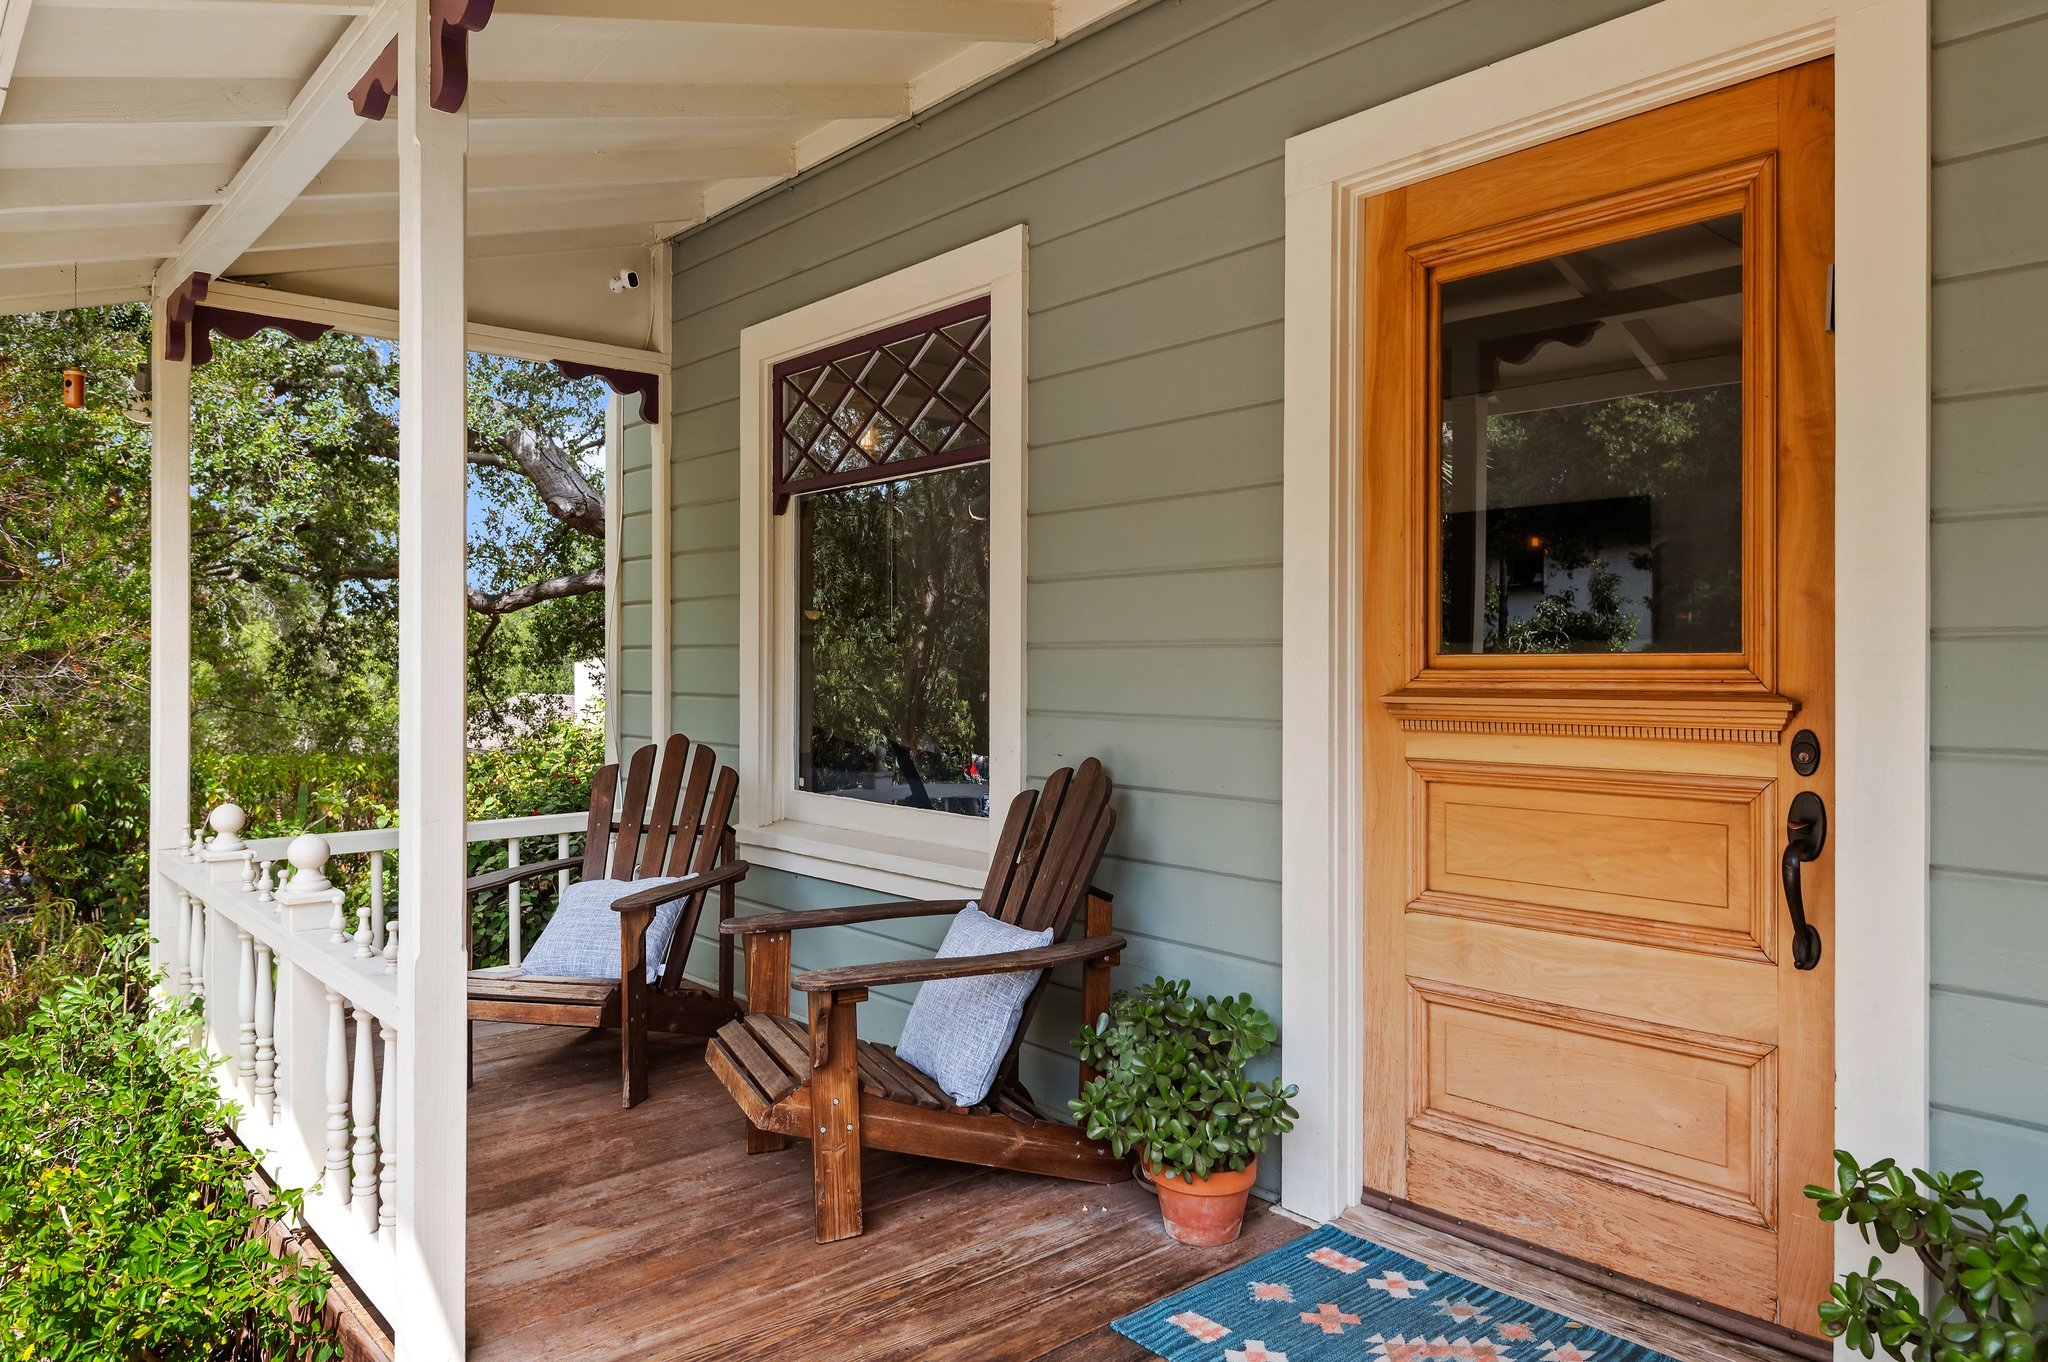 4-web-or-mls-04 - Front Porch.jpg